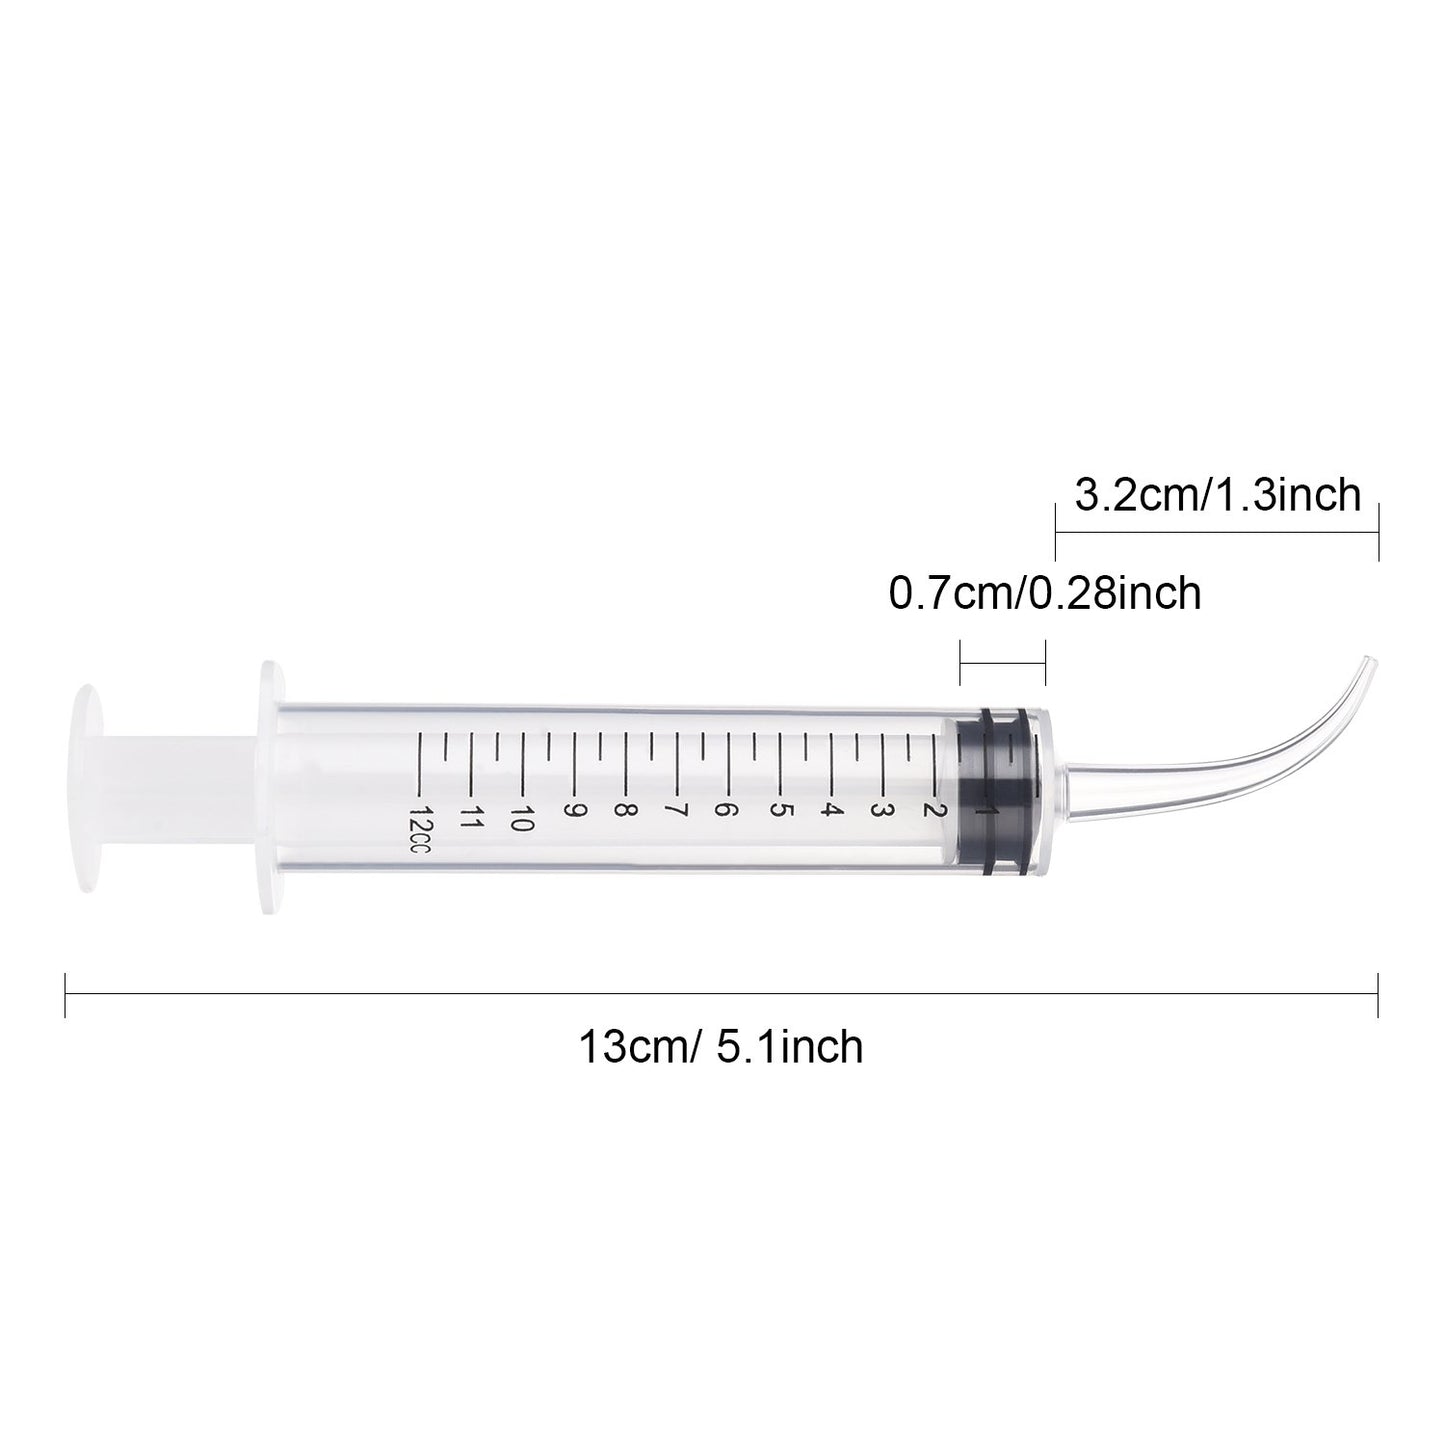 DS-8 Disposable 12cc Dental Syringe Dental Irrigation Syringe with Curved Tip, Tonsil Stone Squirt Mouthwash Cleaner with Measurement (individually packaged)